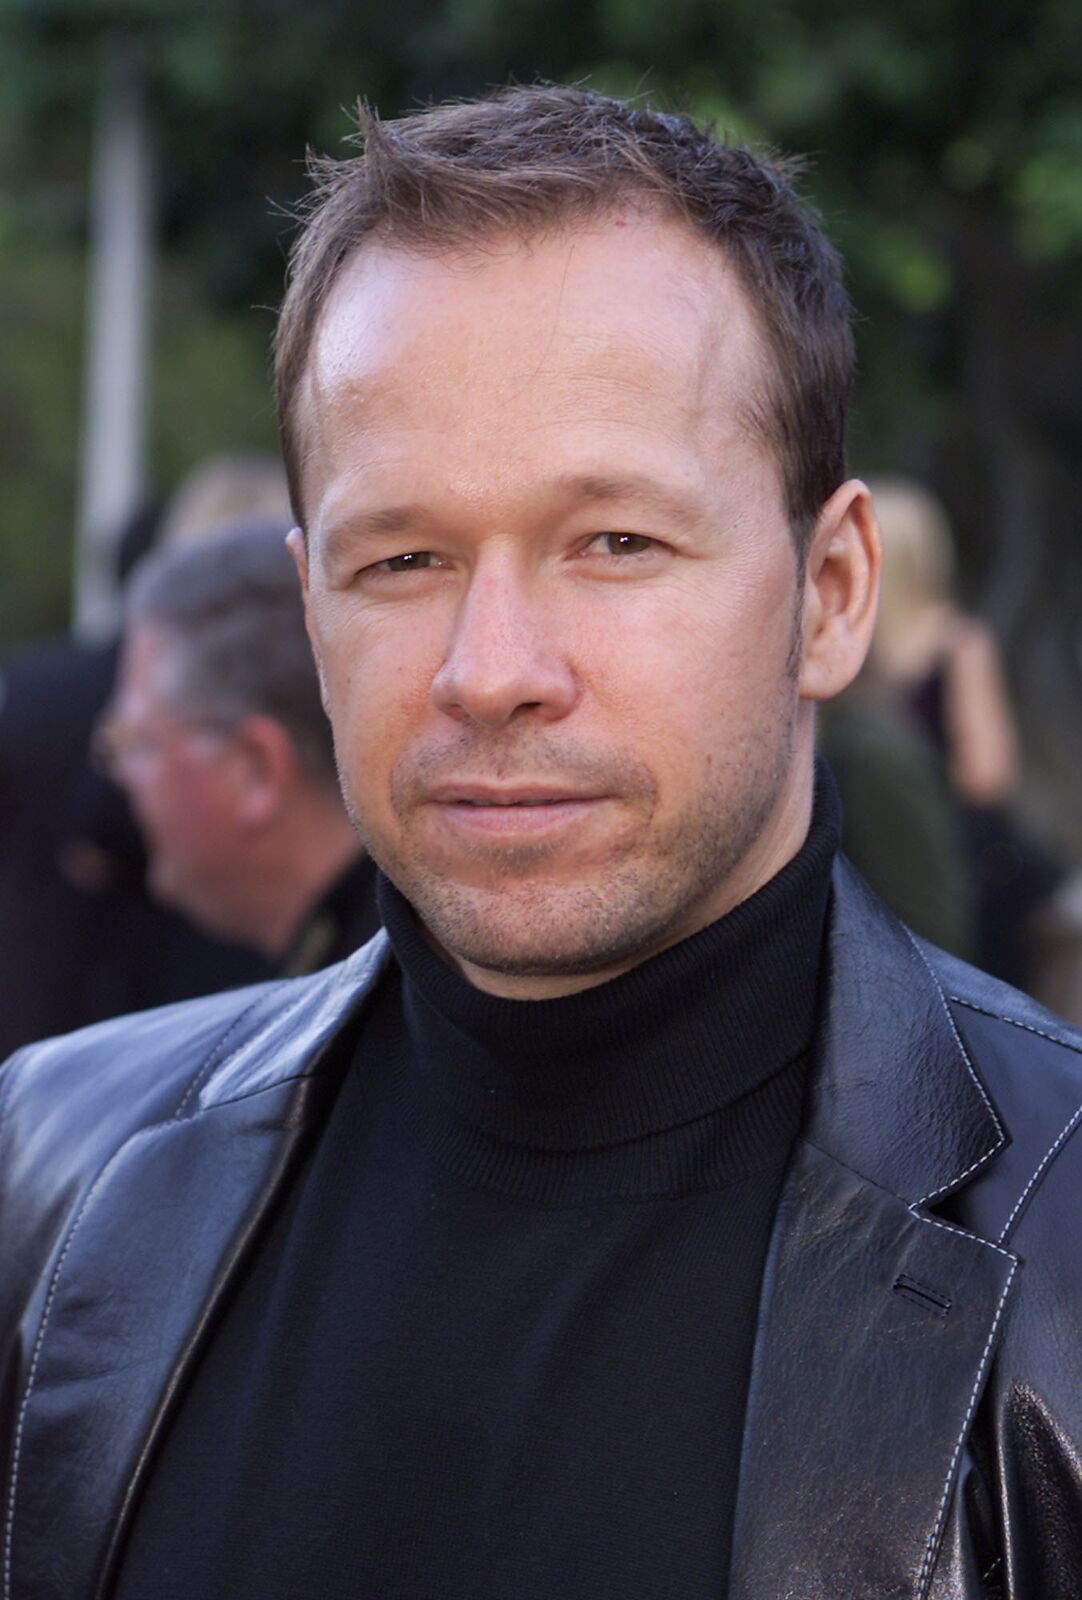 Donnie Wahlberg at the premiere of HBO's "Band of Brothers" at the Hollywood Bowl, Los Angeles on August 28, 2001 | Photo: Kevin Winter/Getty Images